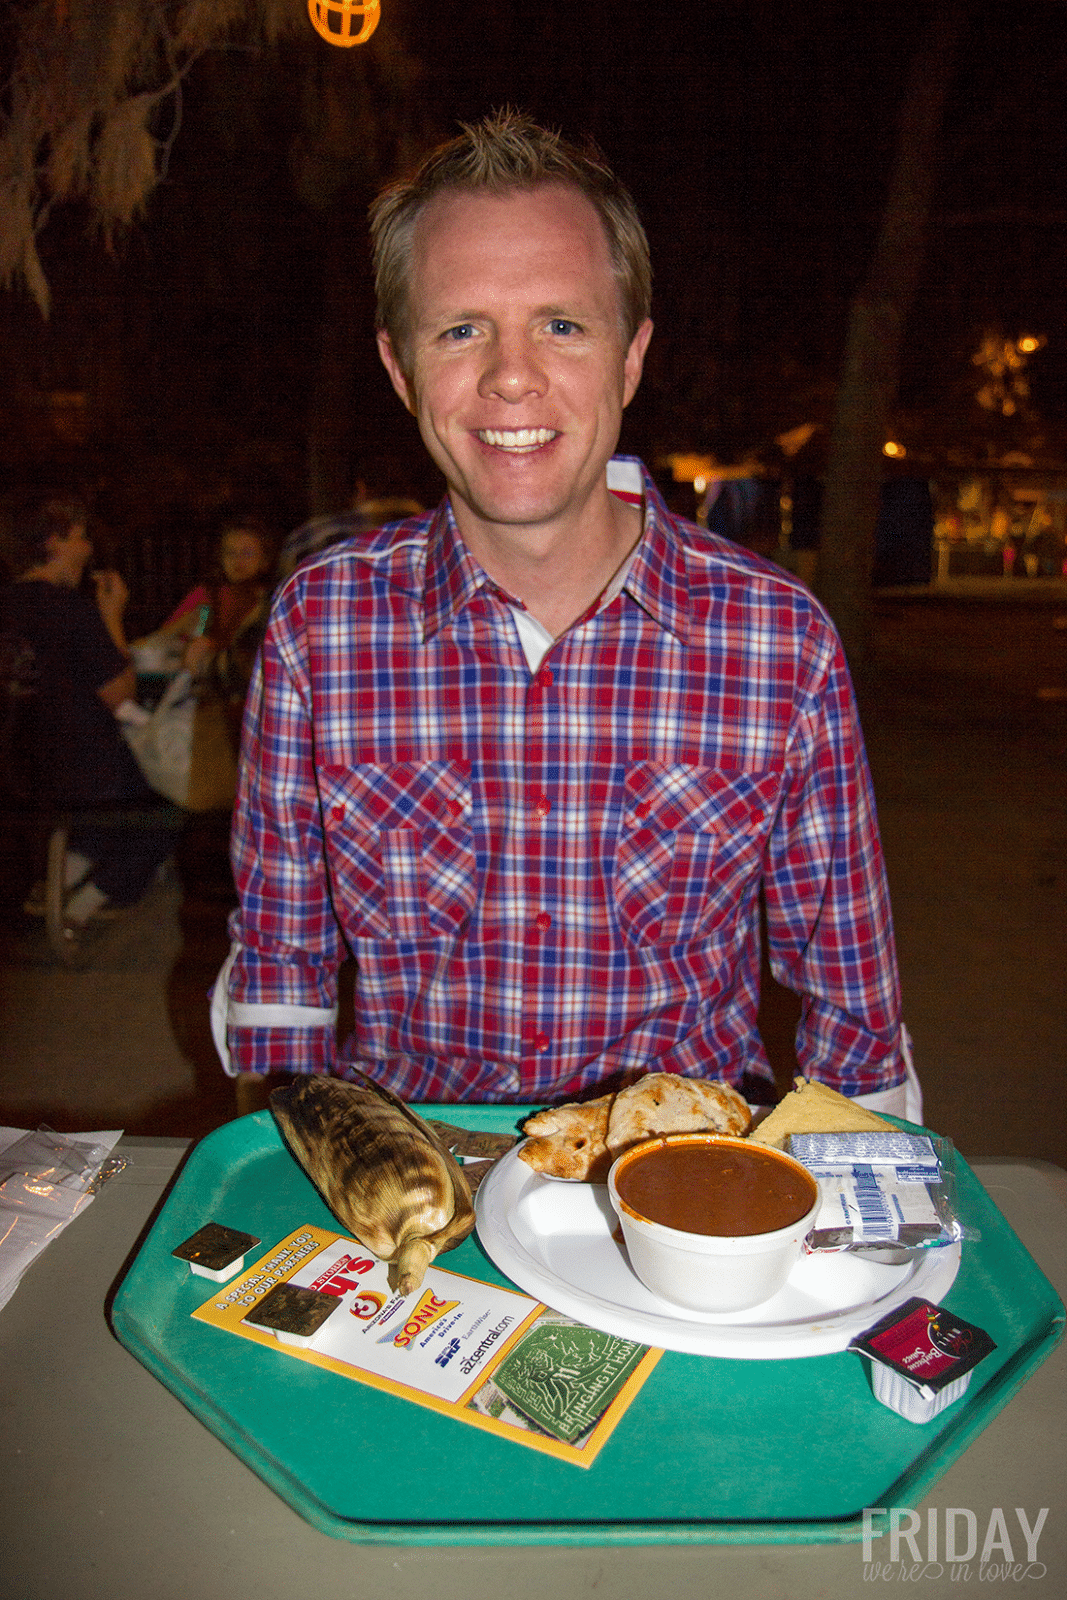 Man enjoying the food at Schnepf Farms Pumpkin and Chili Fest at nighttime. 